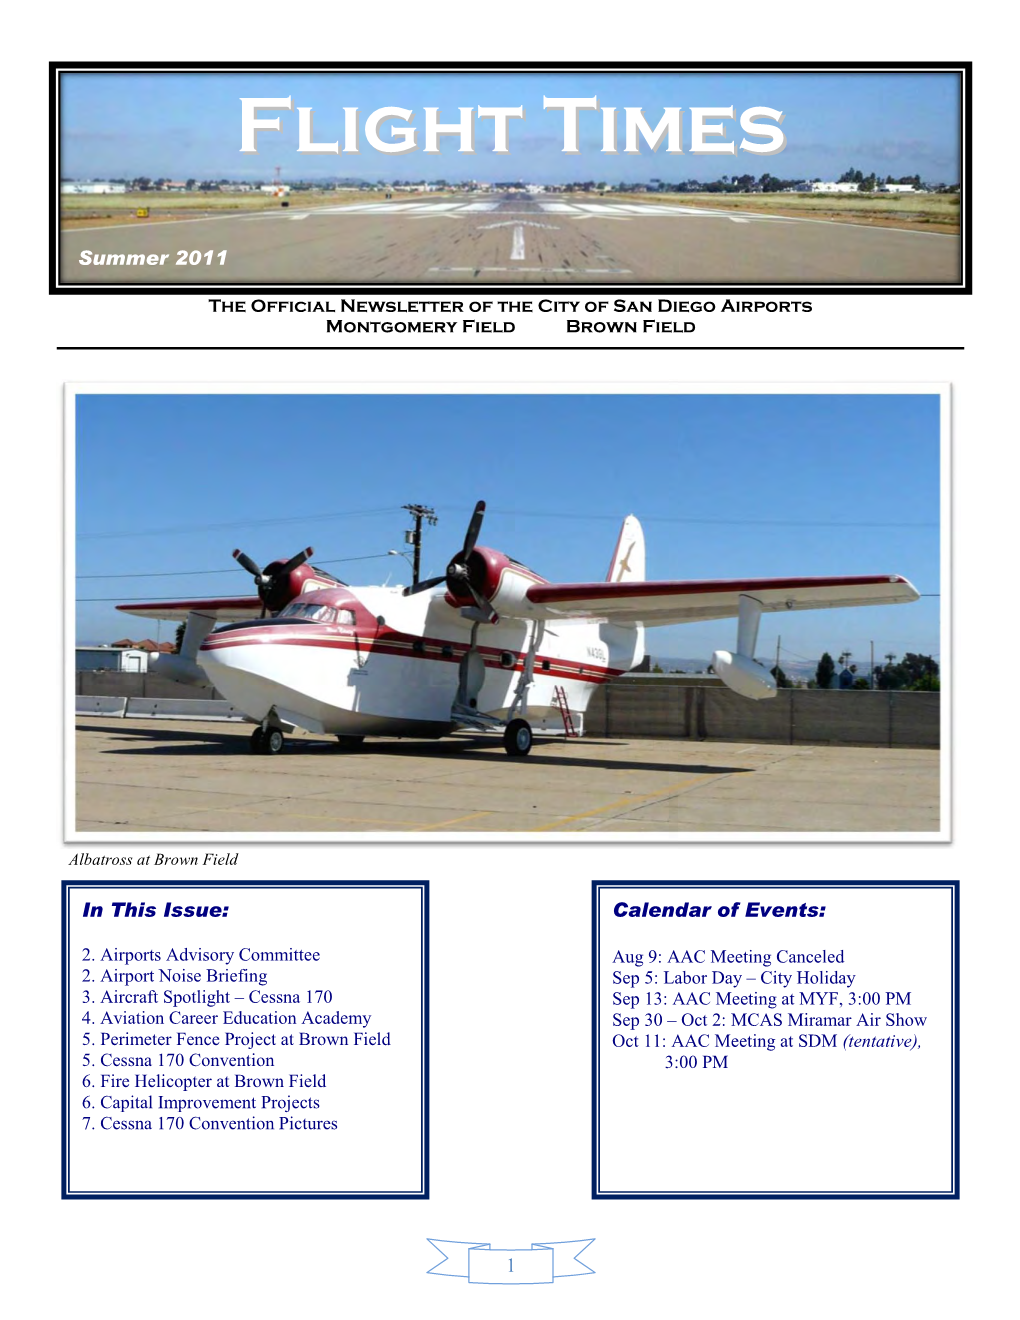 Flight Times Is Published by the City of San Diego, Airports Division 3750 John J Montgomery Drive, San Diego, CA 92123